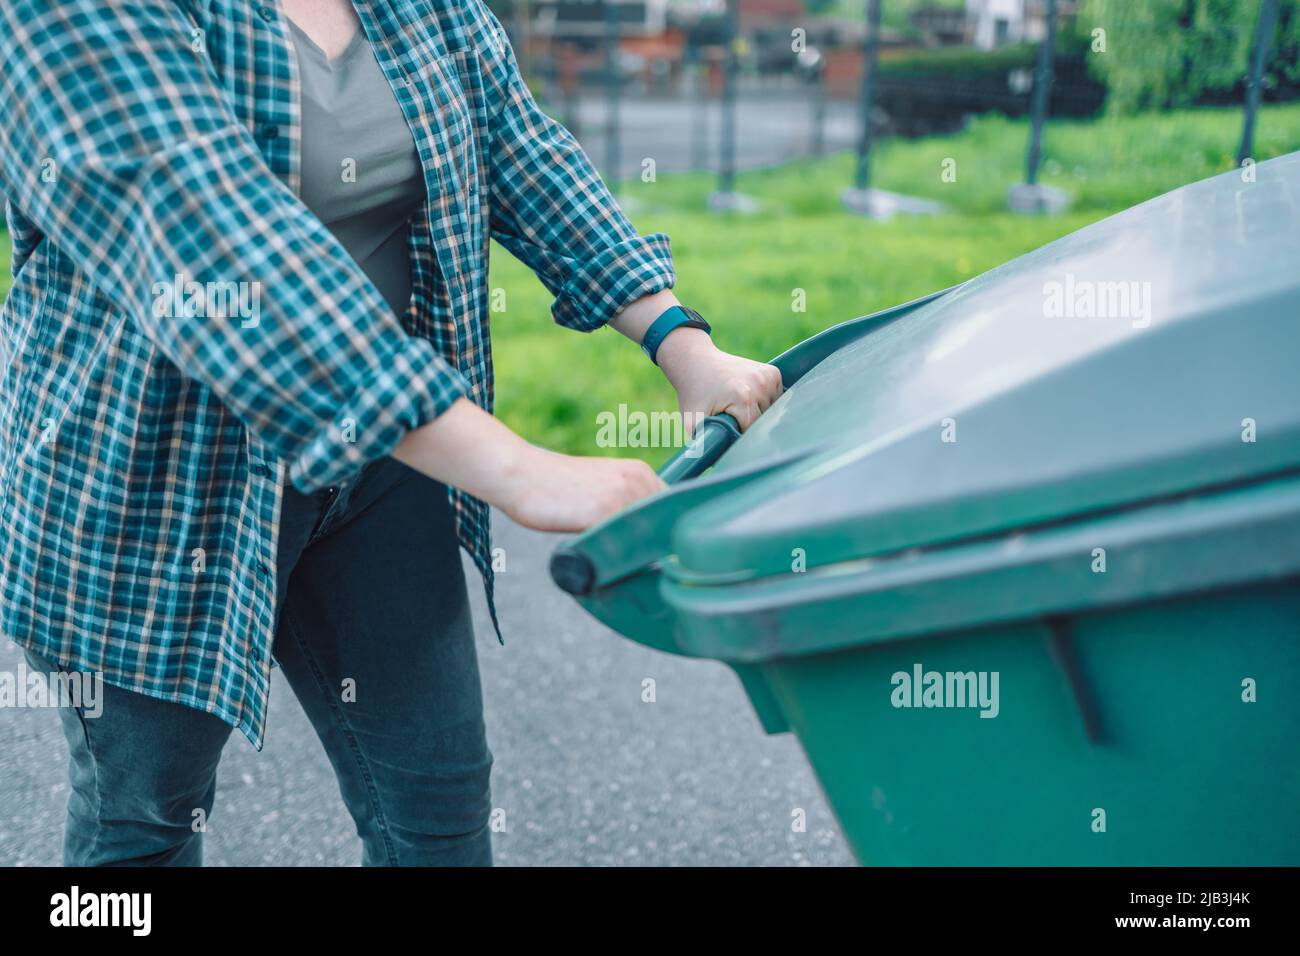 European 20s girl take out the trash can sorting garbage near a home Stock Photo